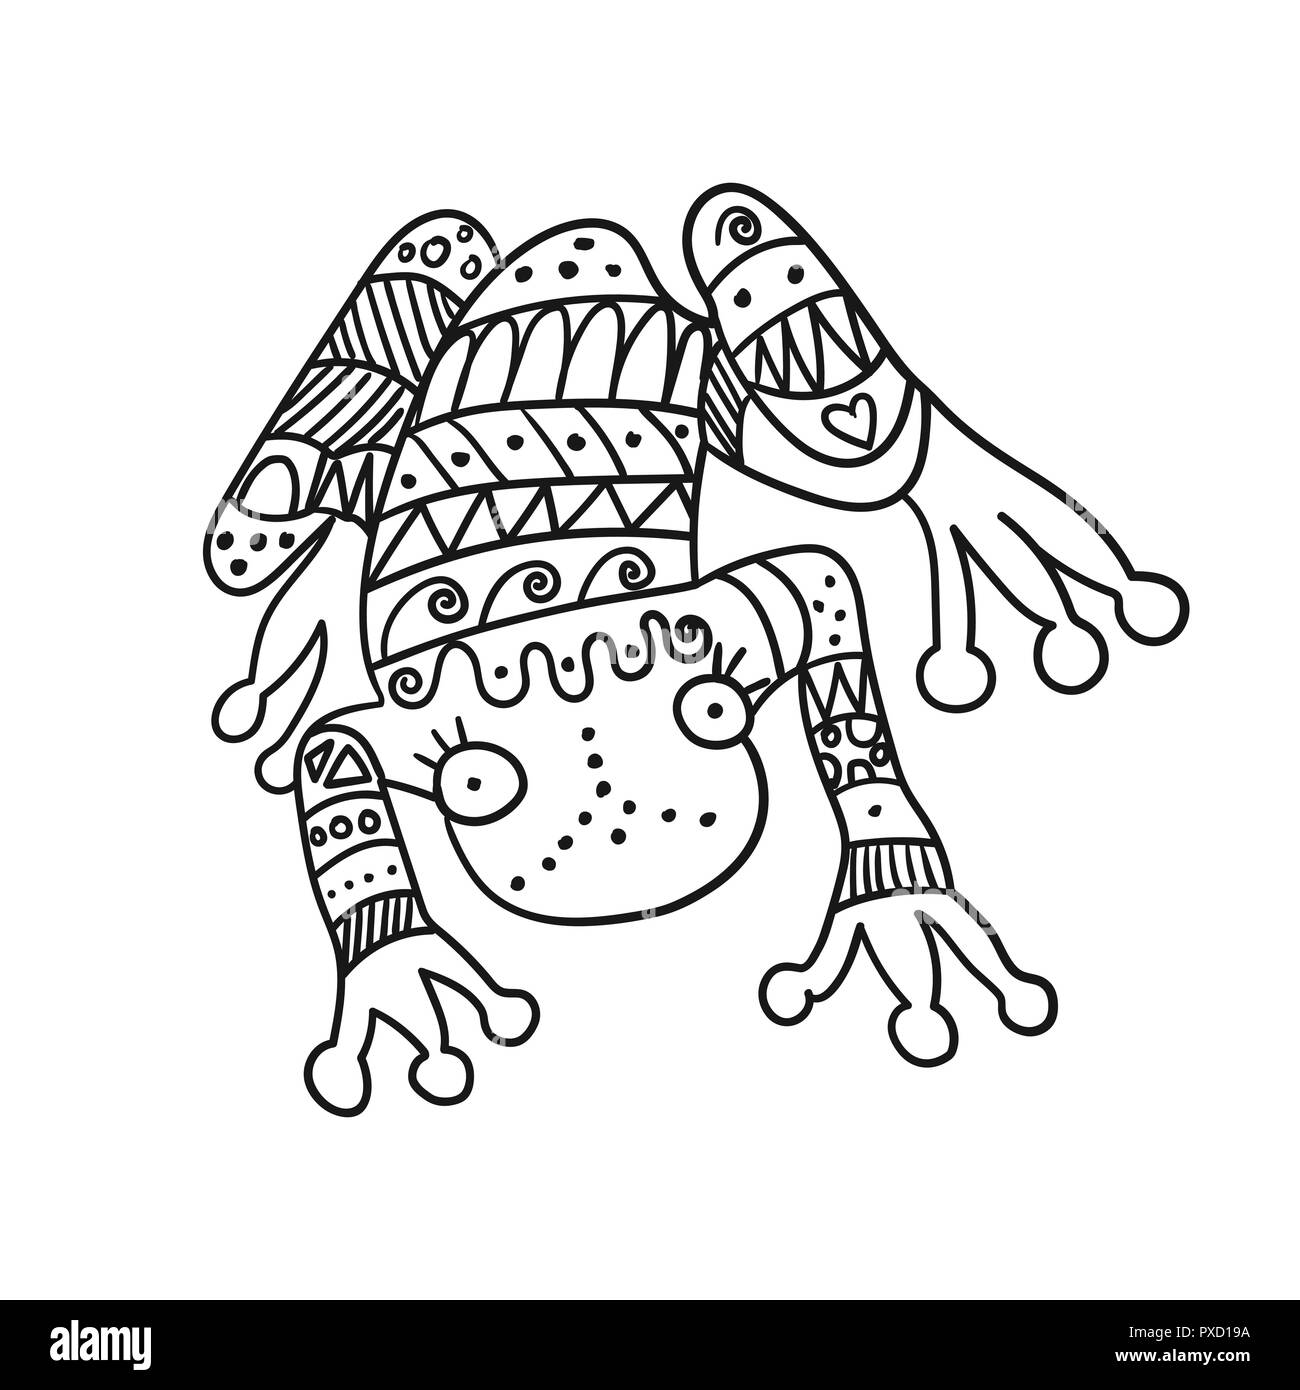 Stylized frog isolated on white background. Freehand ornamental frog for children coloring book. Stock Vector